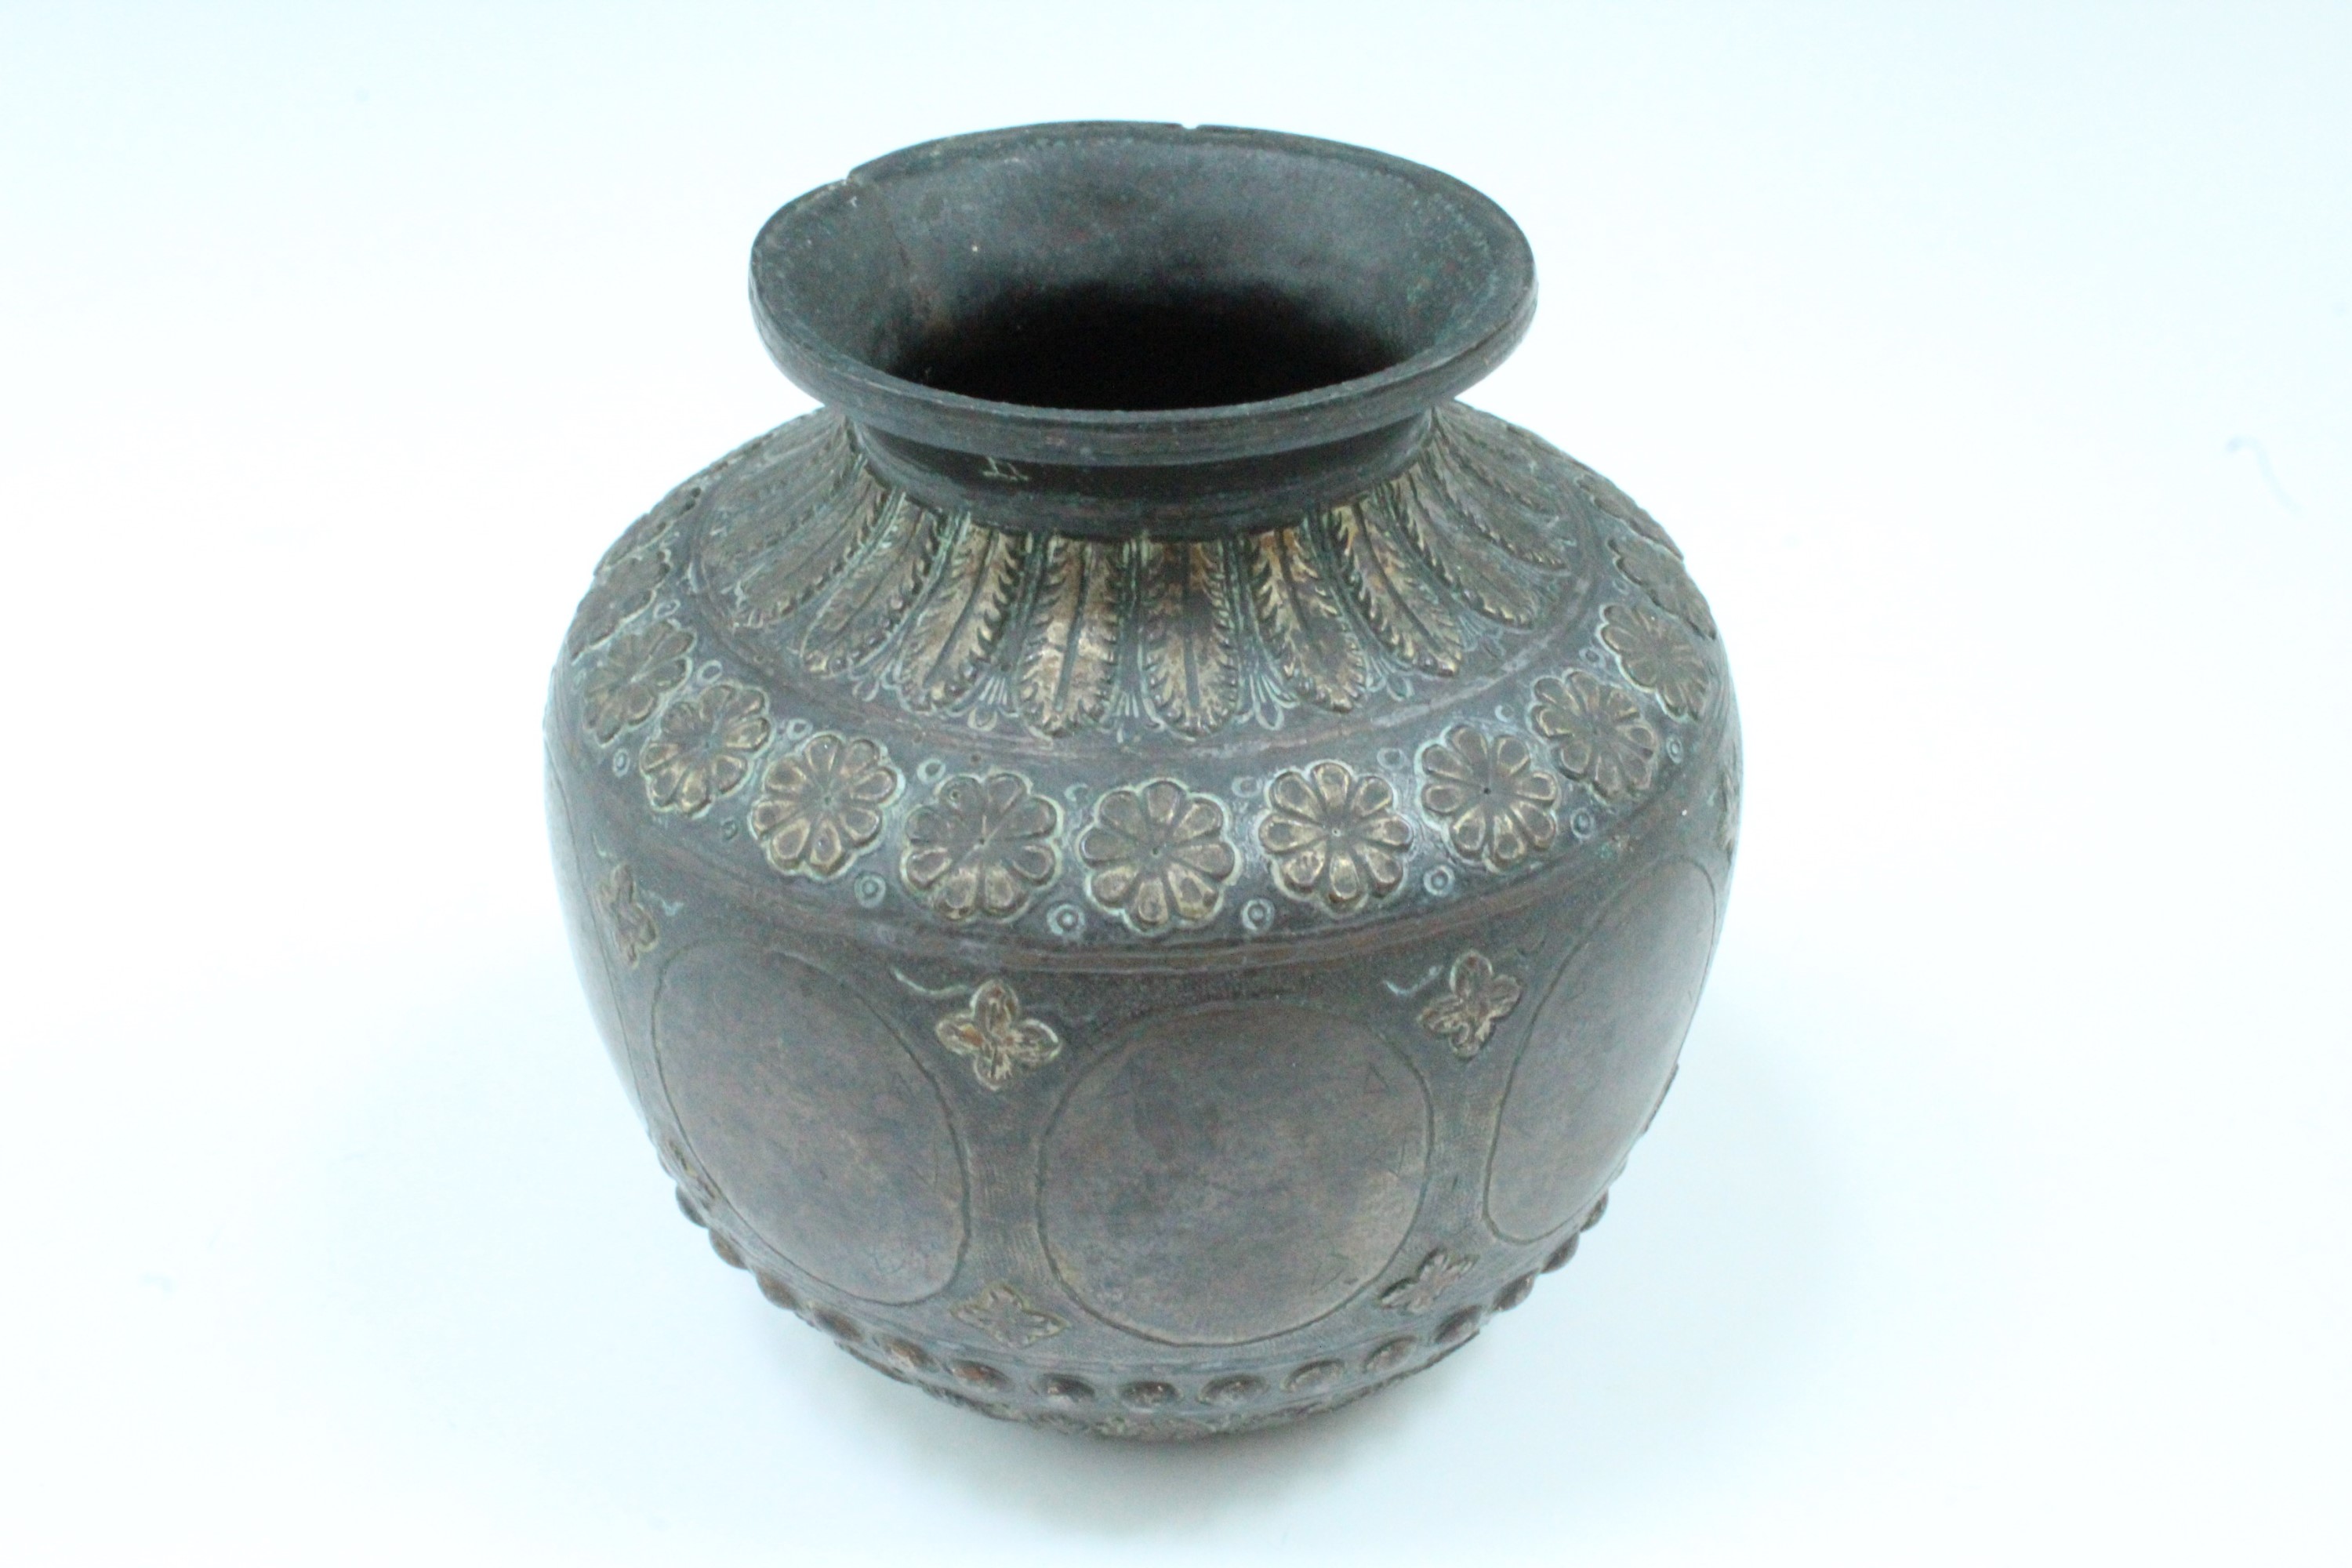 An Ottoman or Middle Eastern chiselled bronze vase, of compressed shouldered form with everted